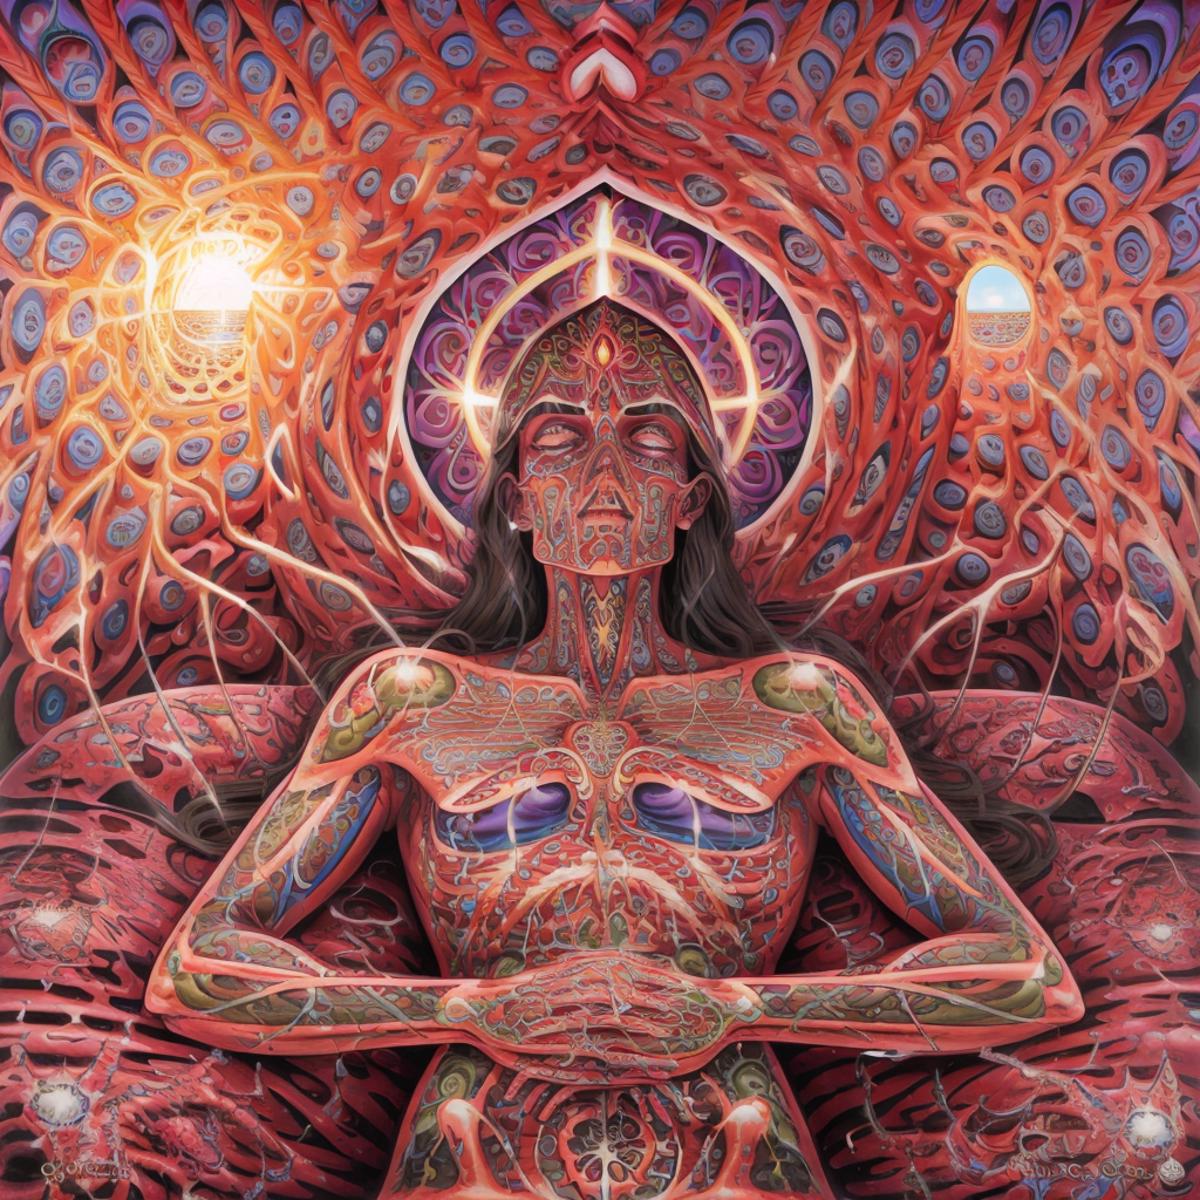 Alex Grey style art (SD 1.5) image by getphat